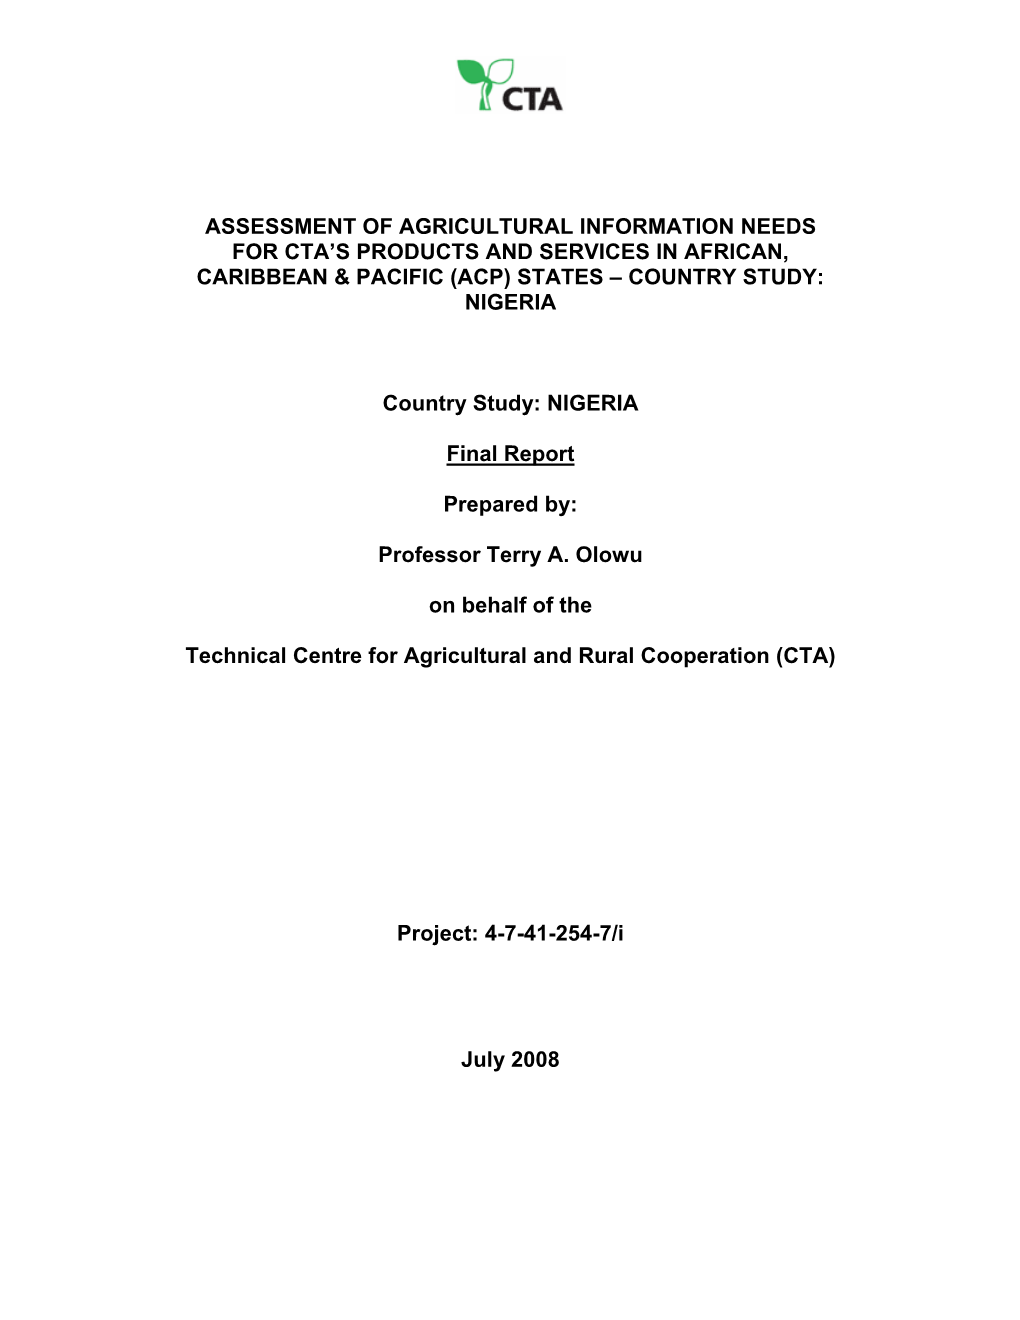 Assessment of Agricultural Information Needs for Cta’S Products and Services in African, Caribbean & Pacific (Acp) States – Country Study: Nigeria